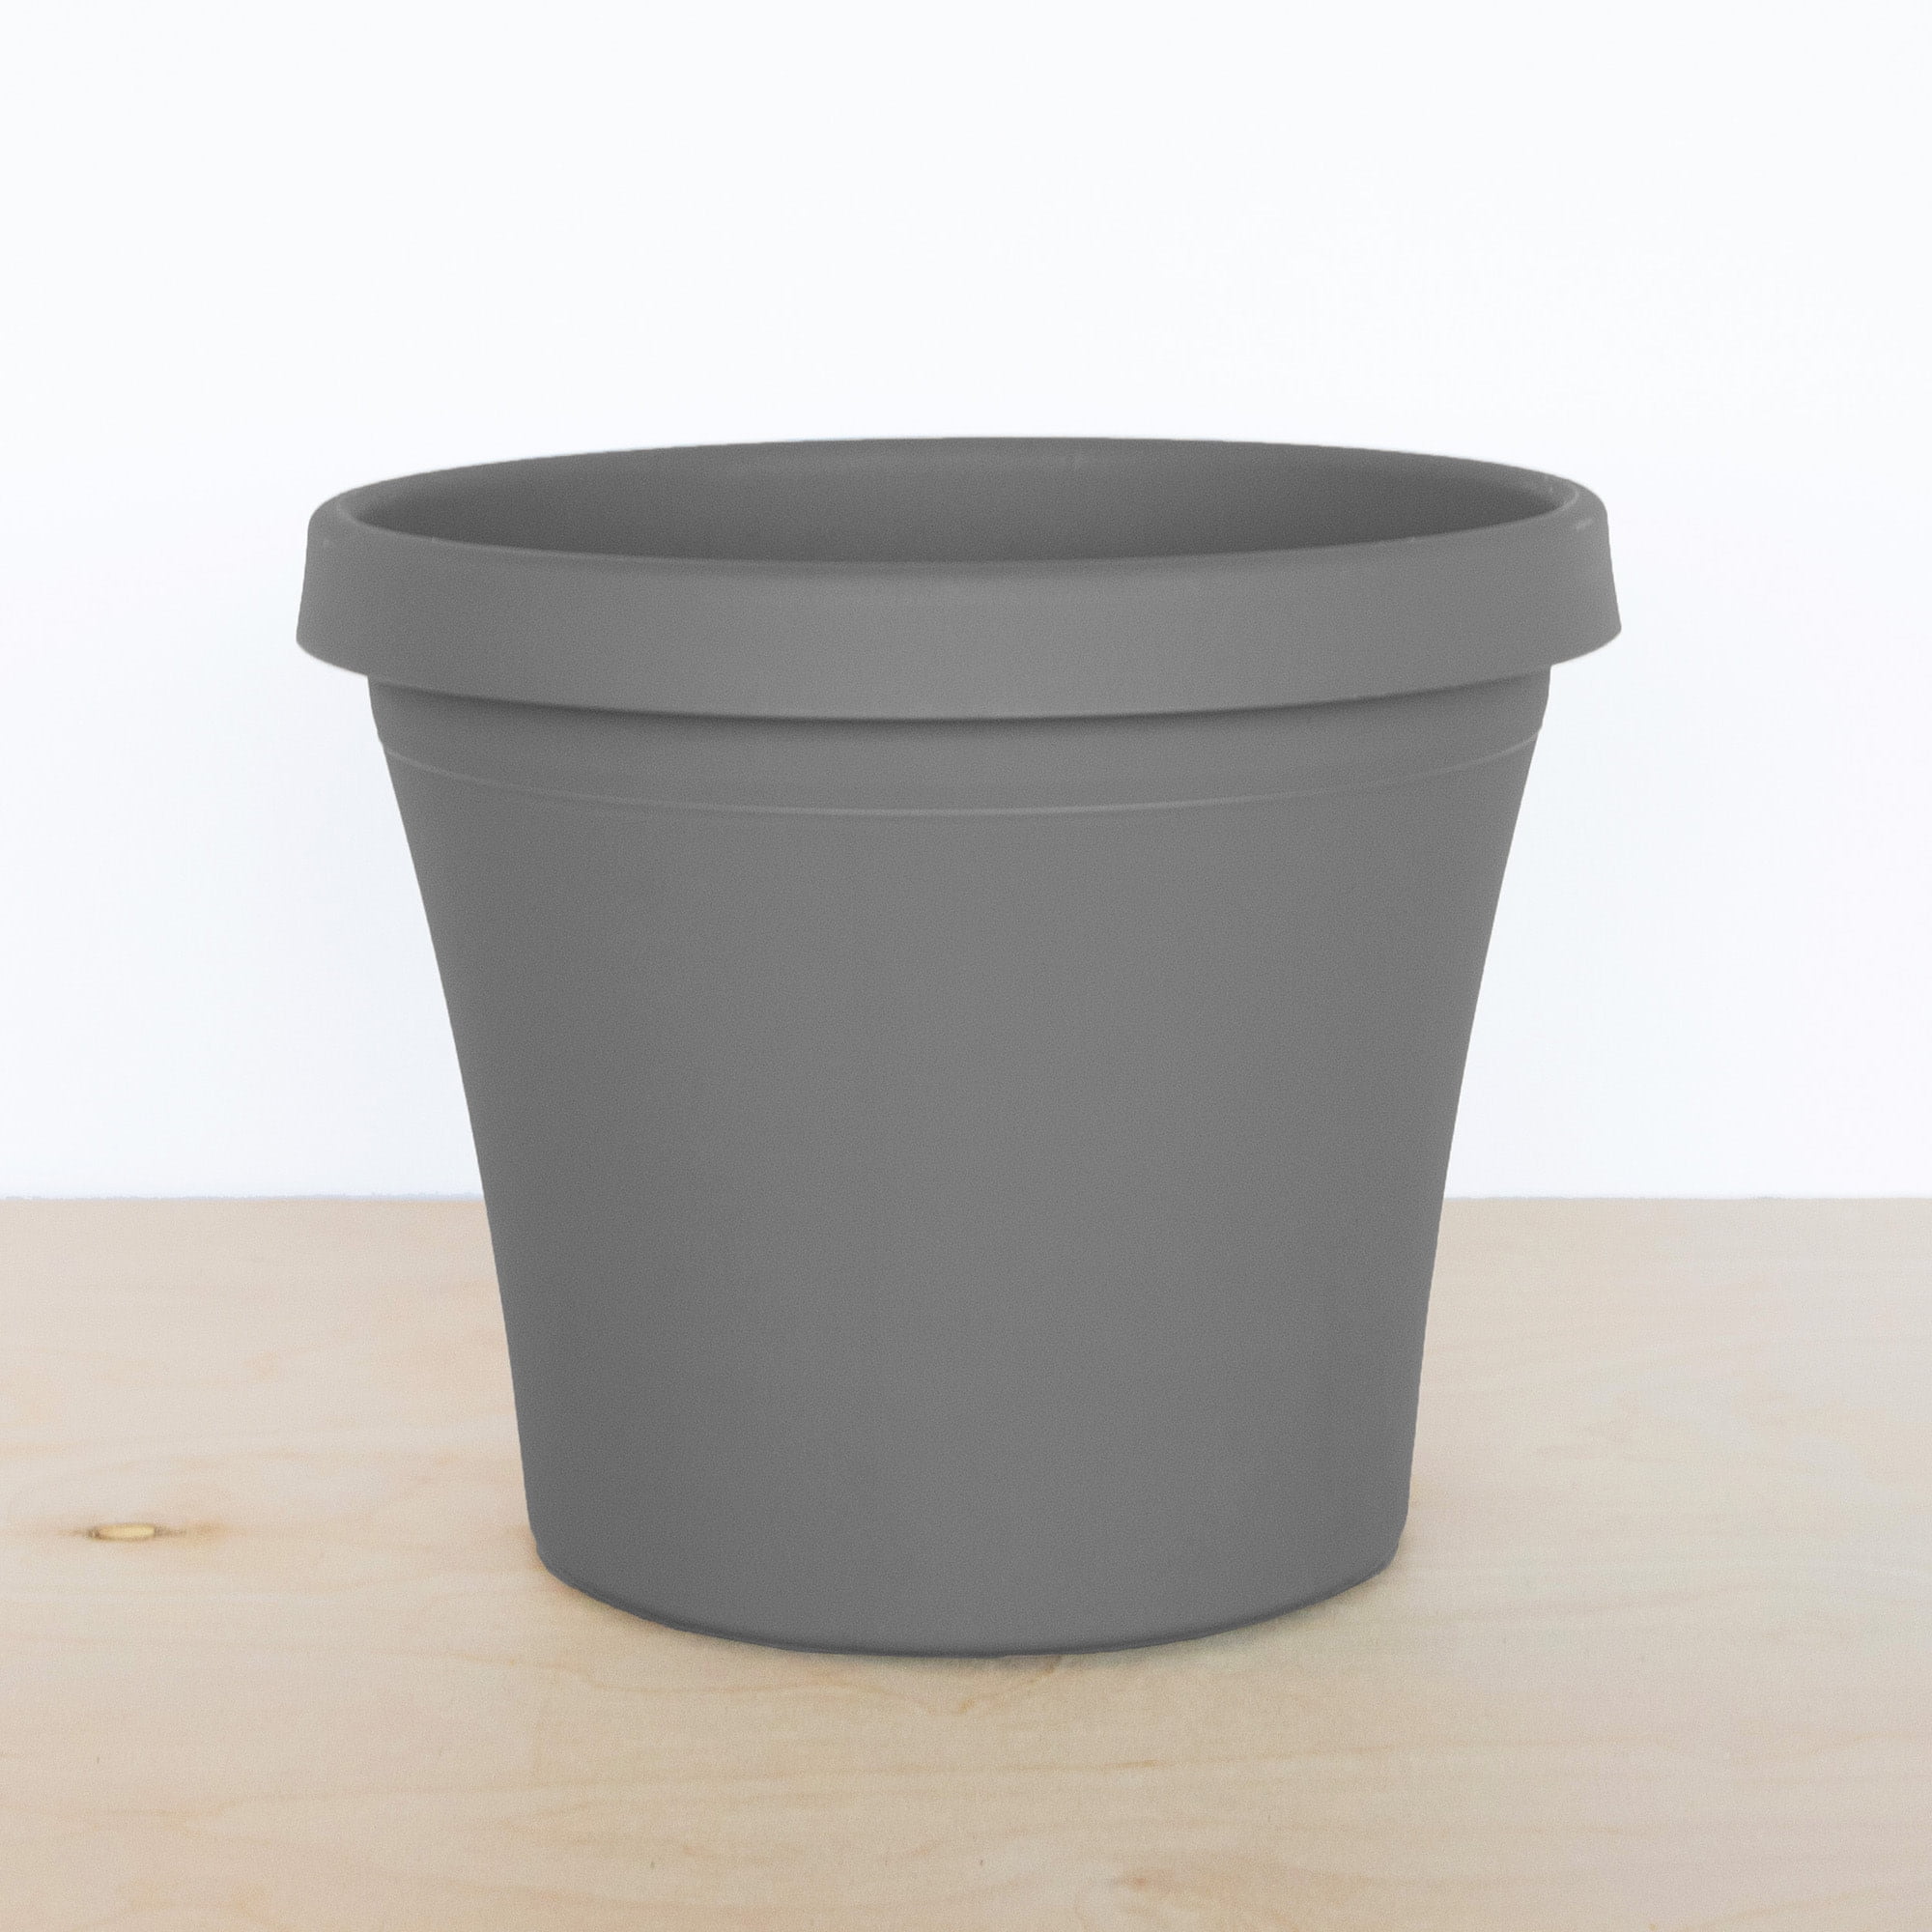 Resin Charcoal - Included) Bloem Gray, Pot, Pot Terra and Outdoor Durable Planter: for 13.5 Indoor Not Capacity Round (Saucer Gallon 20\